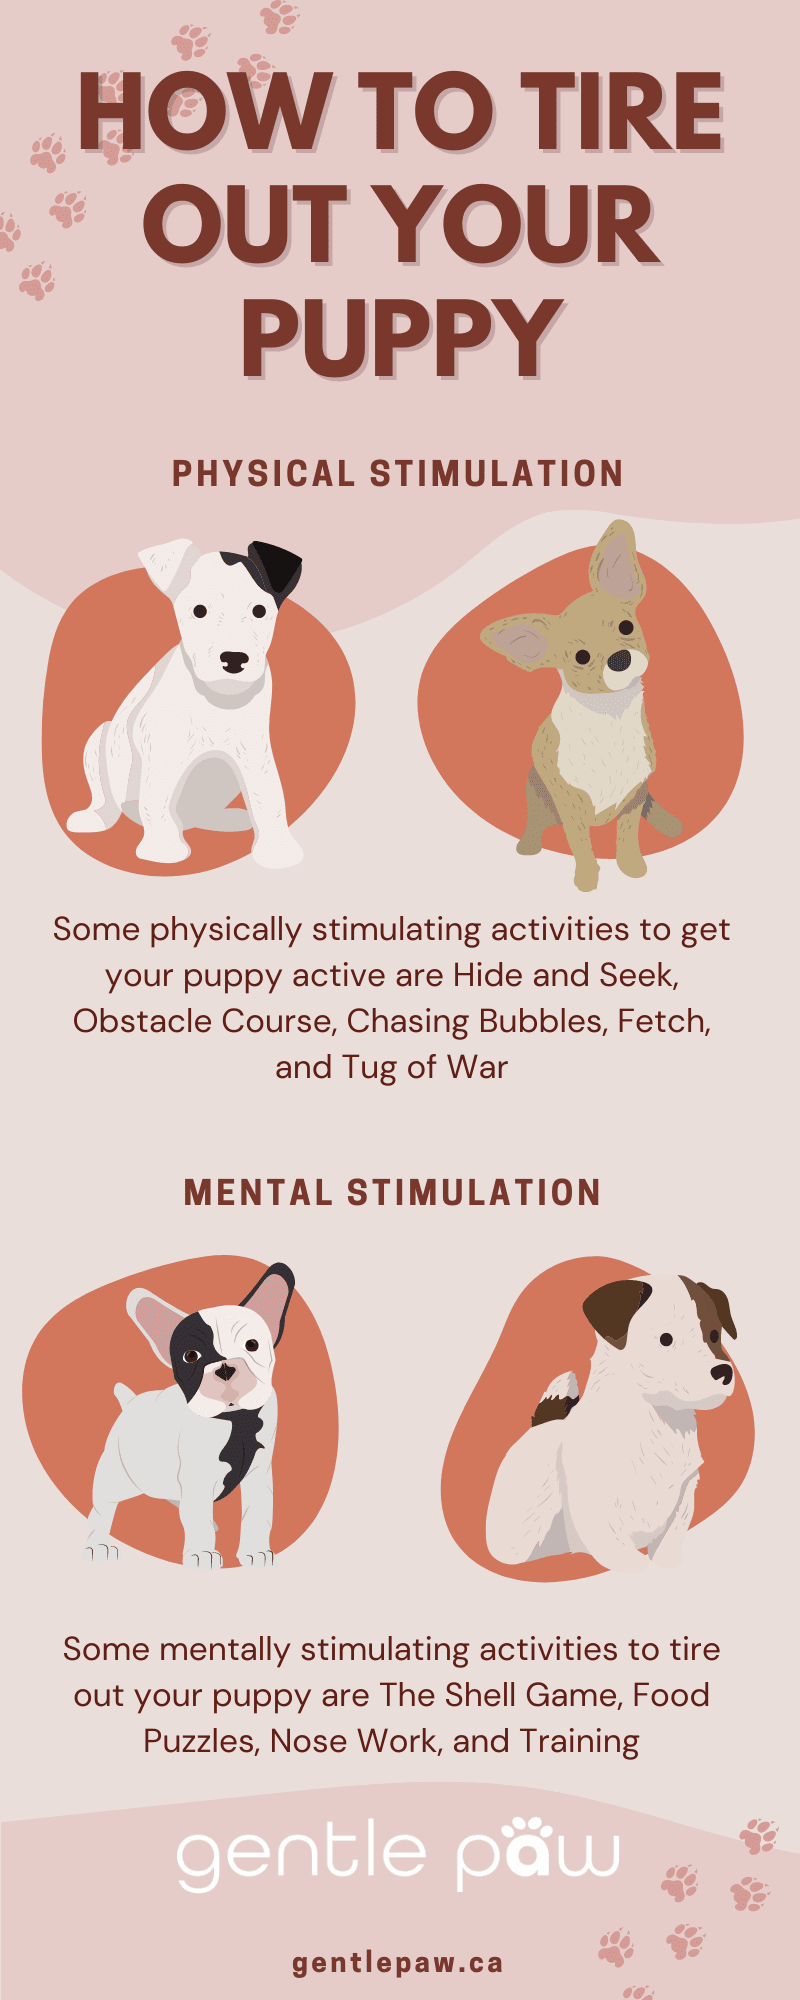 how to tire out your puppy infographic